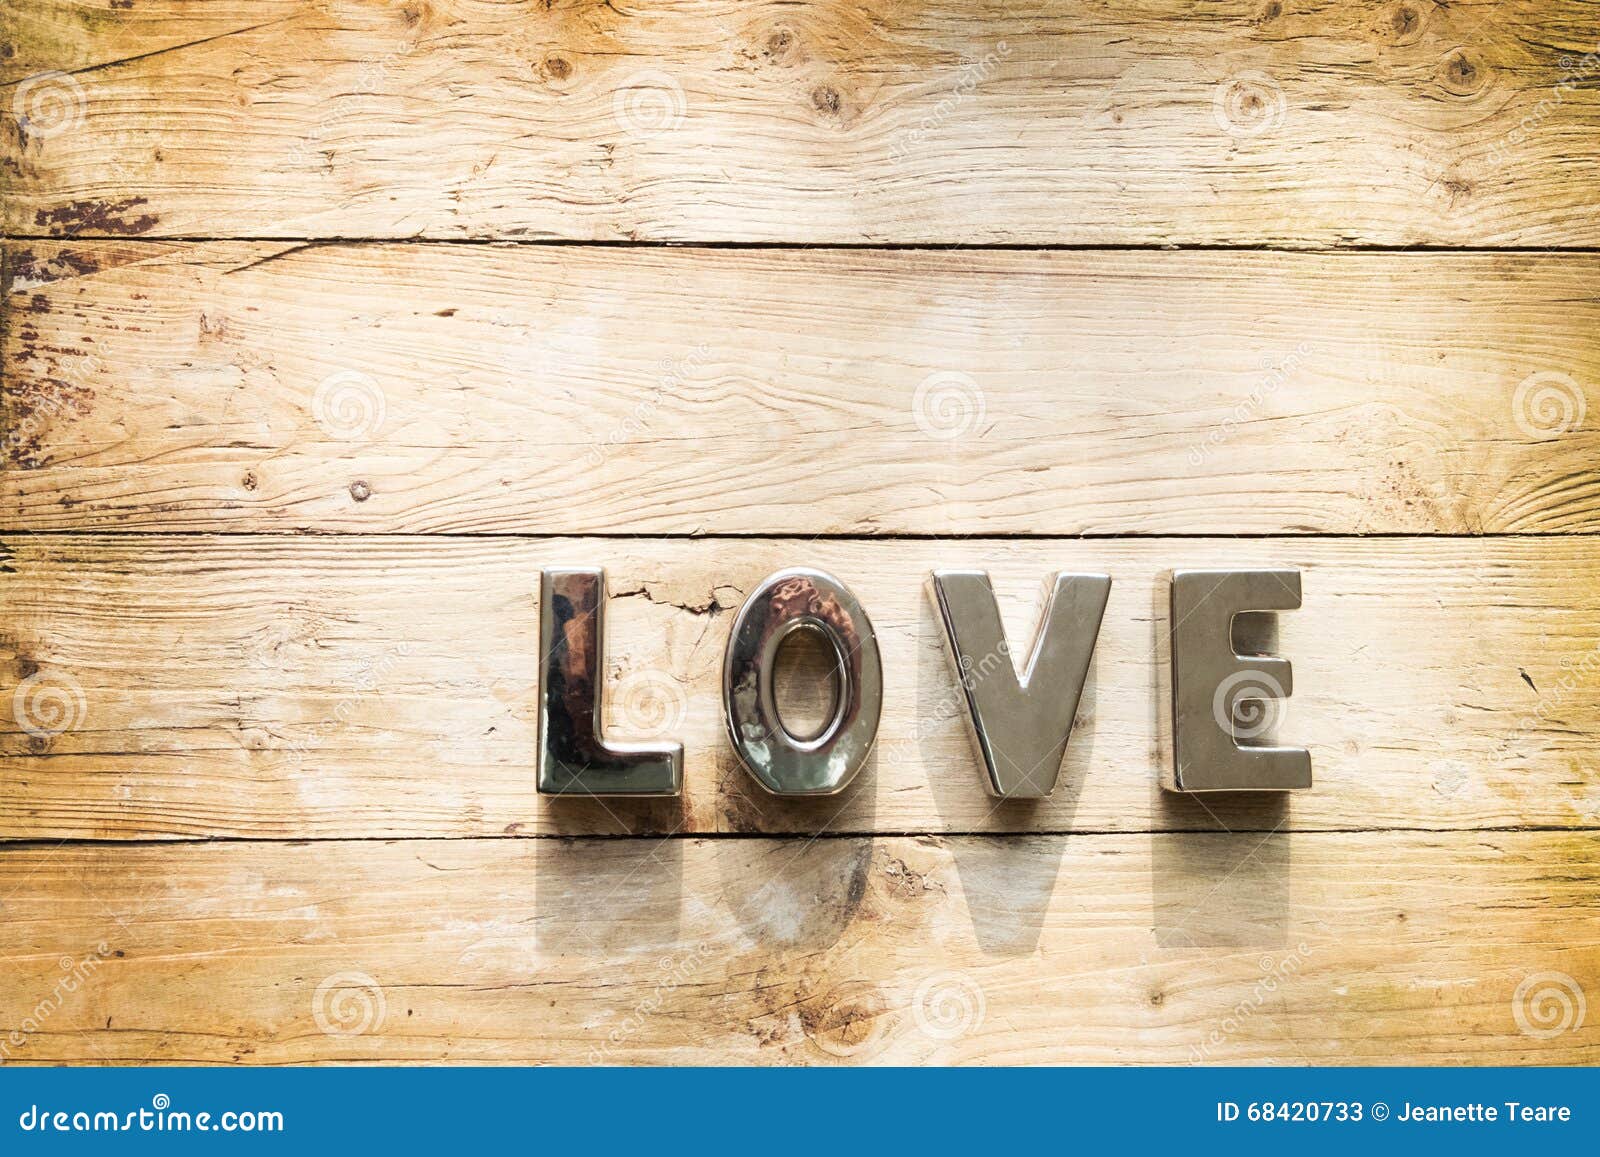 Love Spelled Out on Wooden Background Stock Image - Image of shadow ...